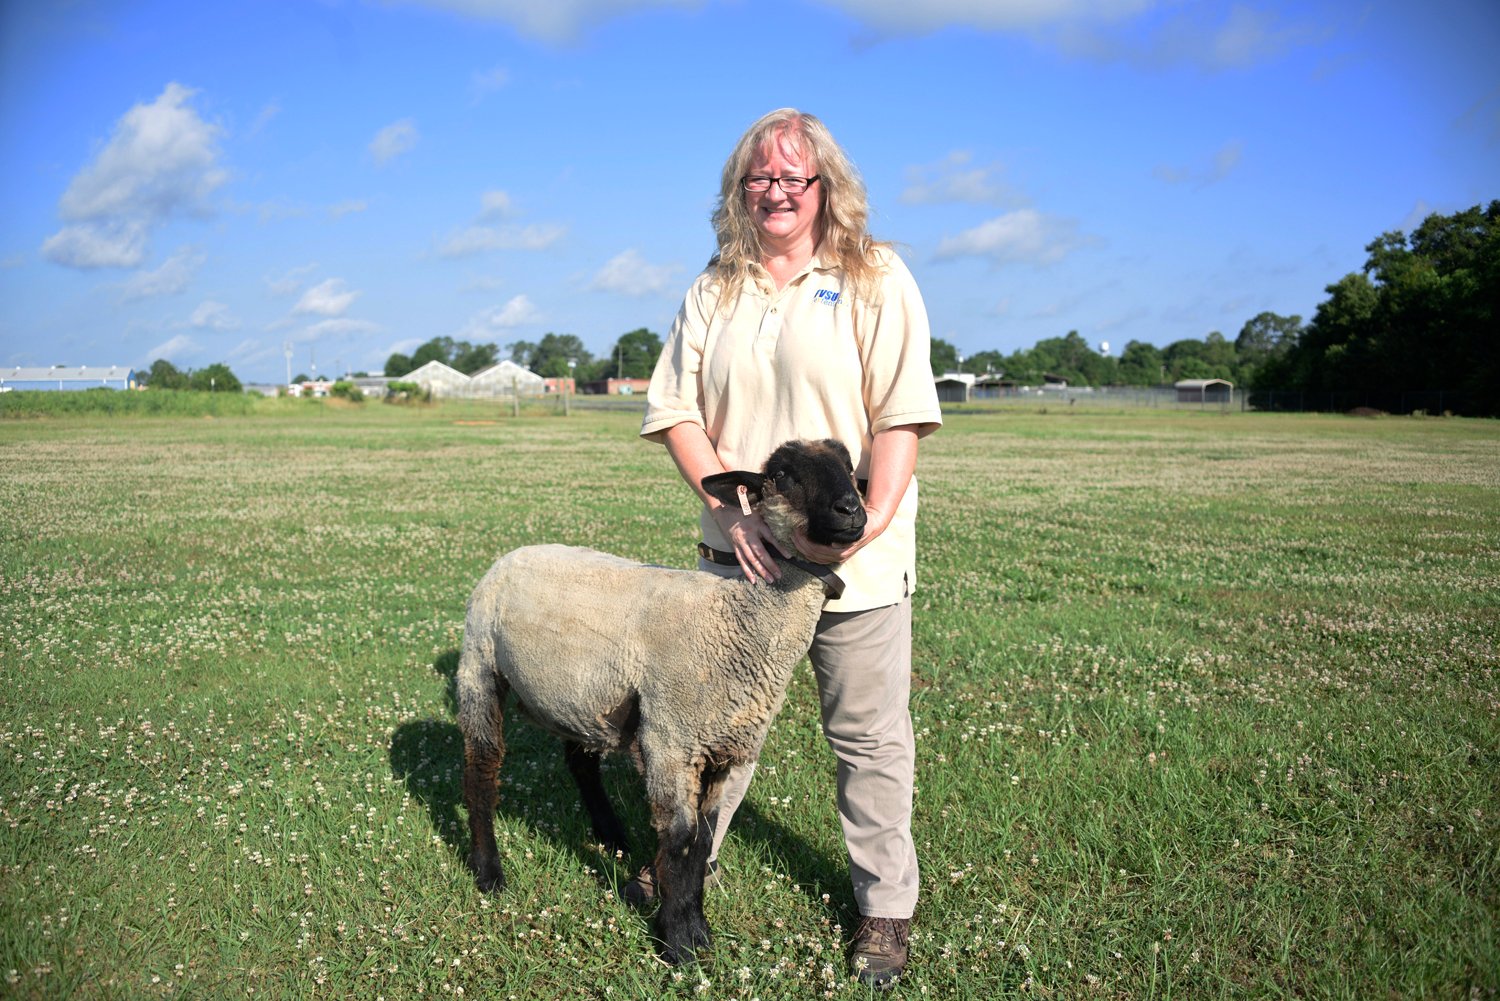 Dr. Niki Whitley, Extension specialist and senior lecturer for Fort Valley State University’s Cooperative Extension Program, serves as the sheep and goat specialist for the state of Georgia.